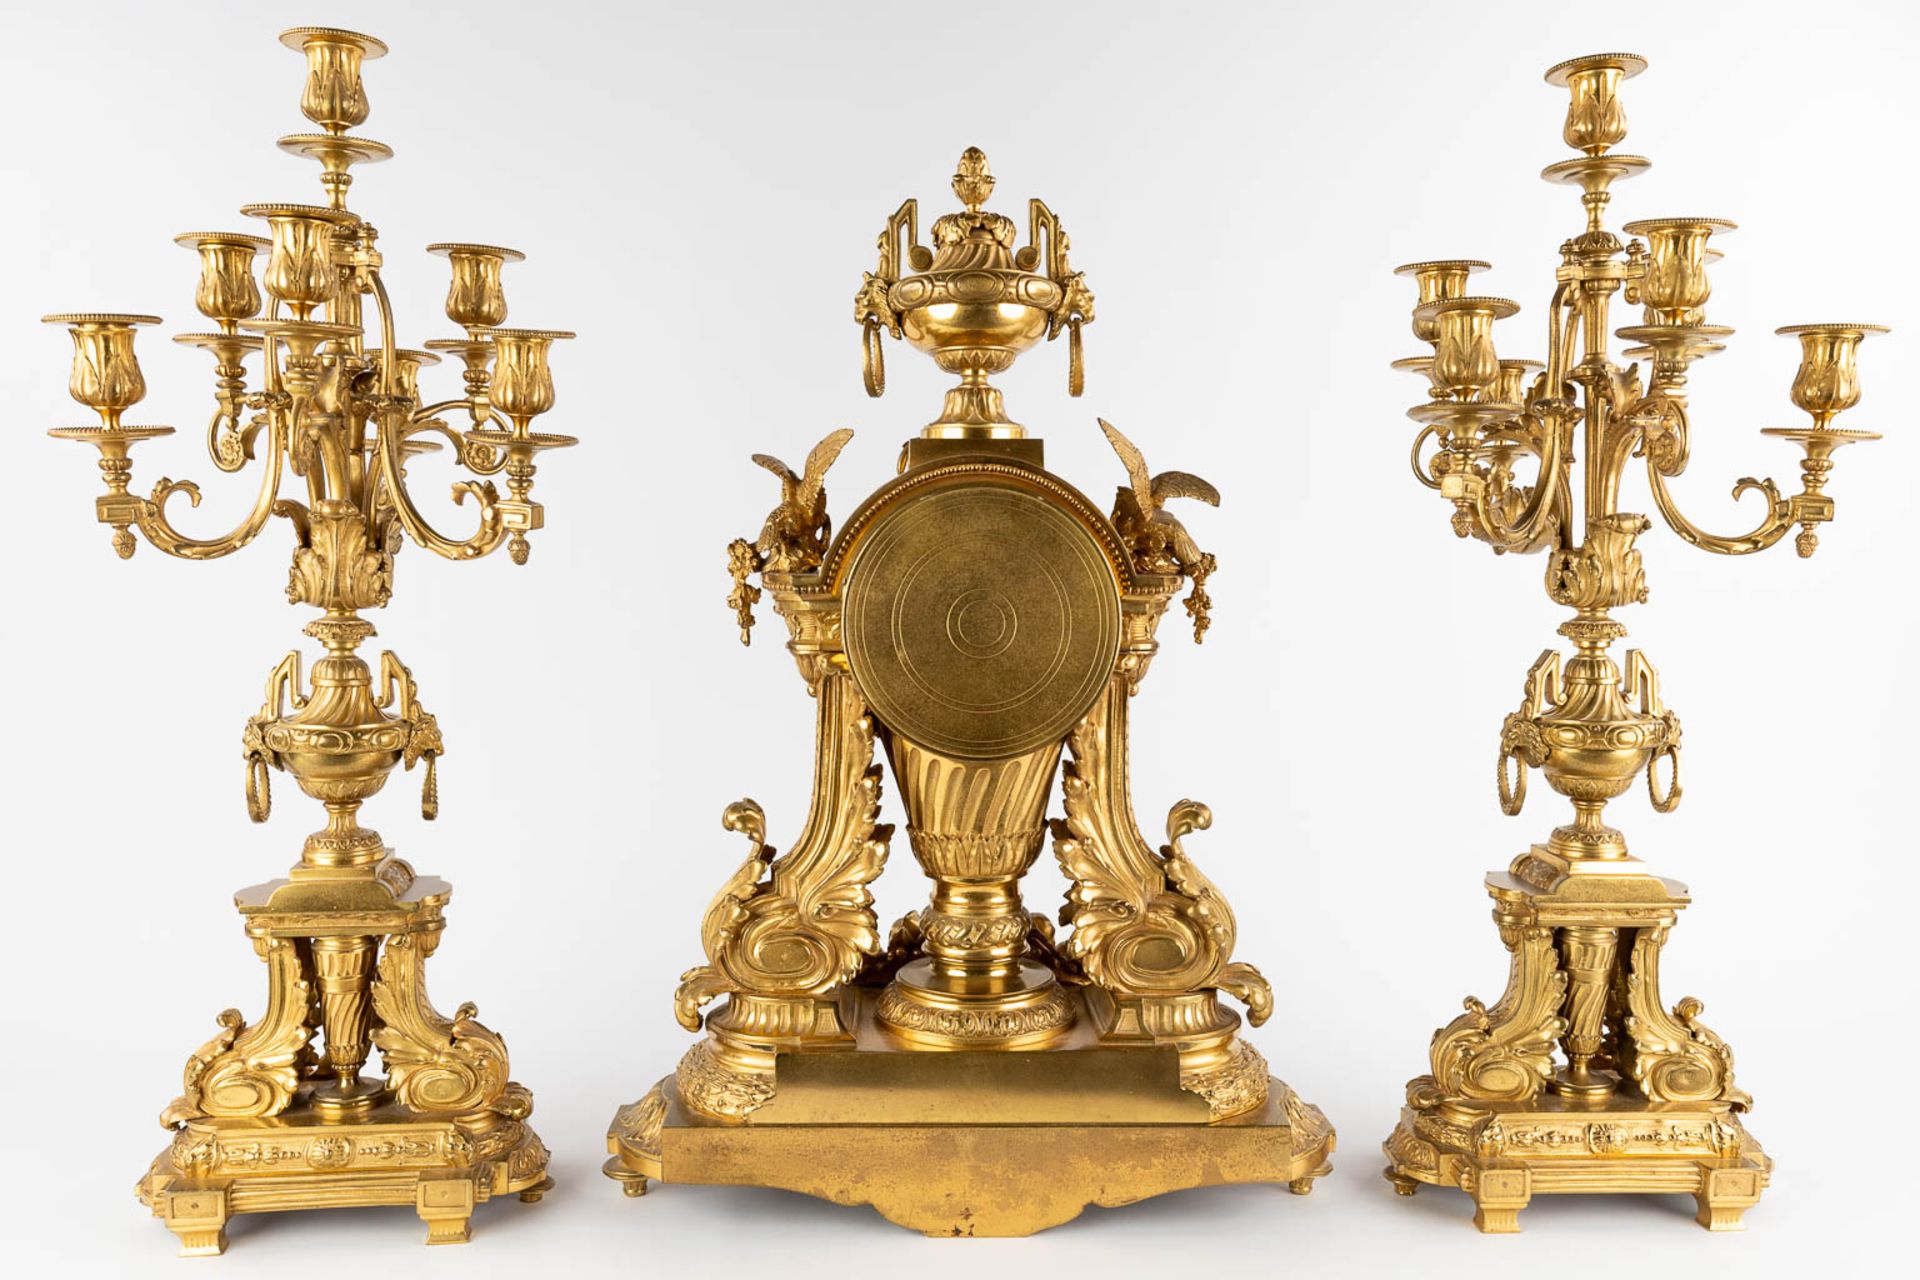 A three-piece mantle garniture clock and candelabra, gilt bronze in a Louis XVI style, 19th C. (D:19 - Image 5 of 19